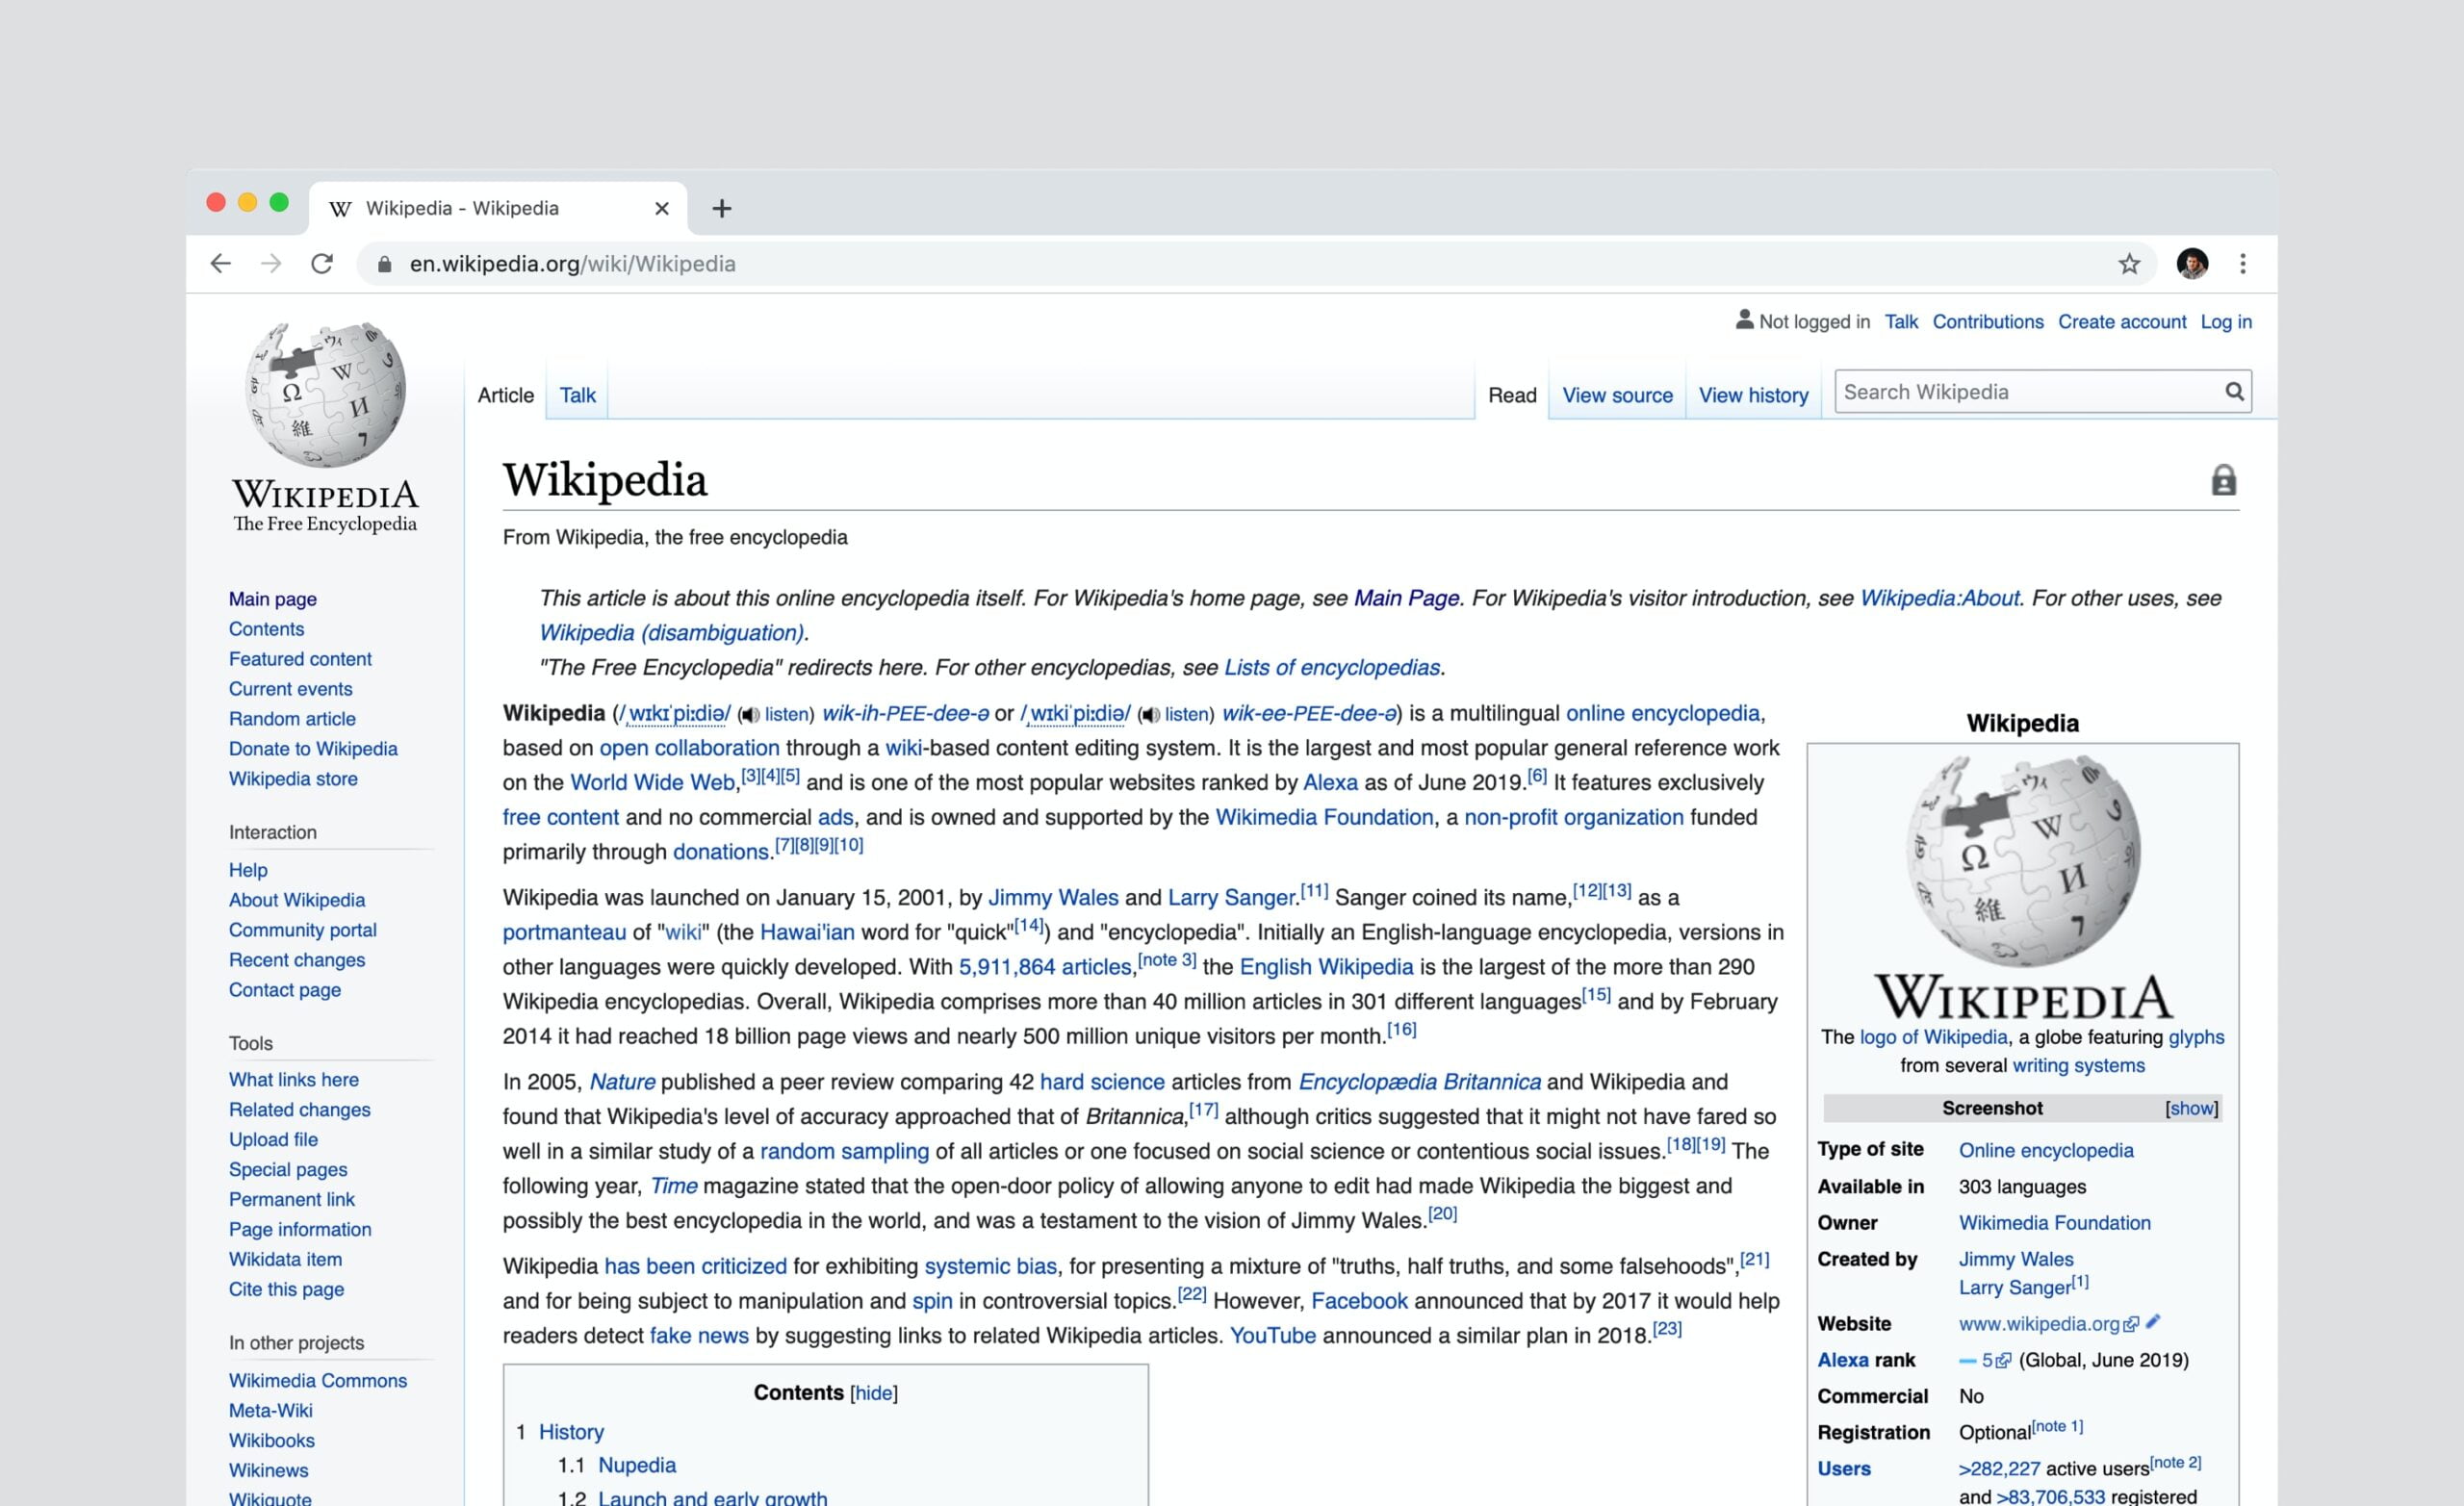 Wikipedia isn’t yet ready to rely on AI for its text, but it’s getting closer